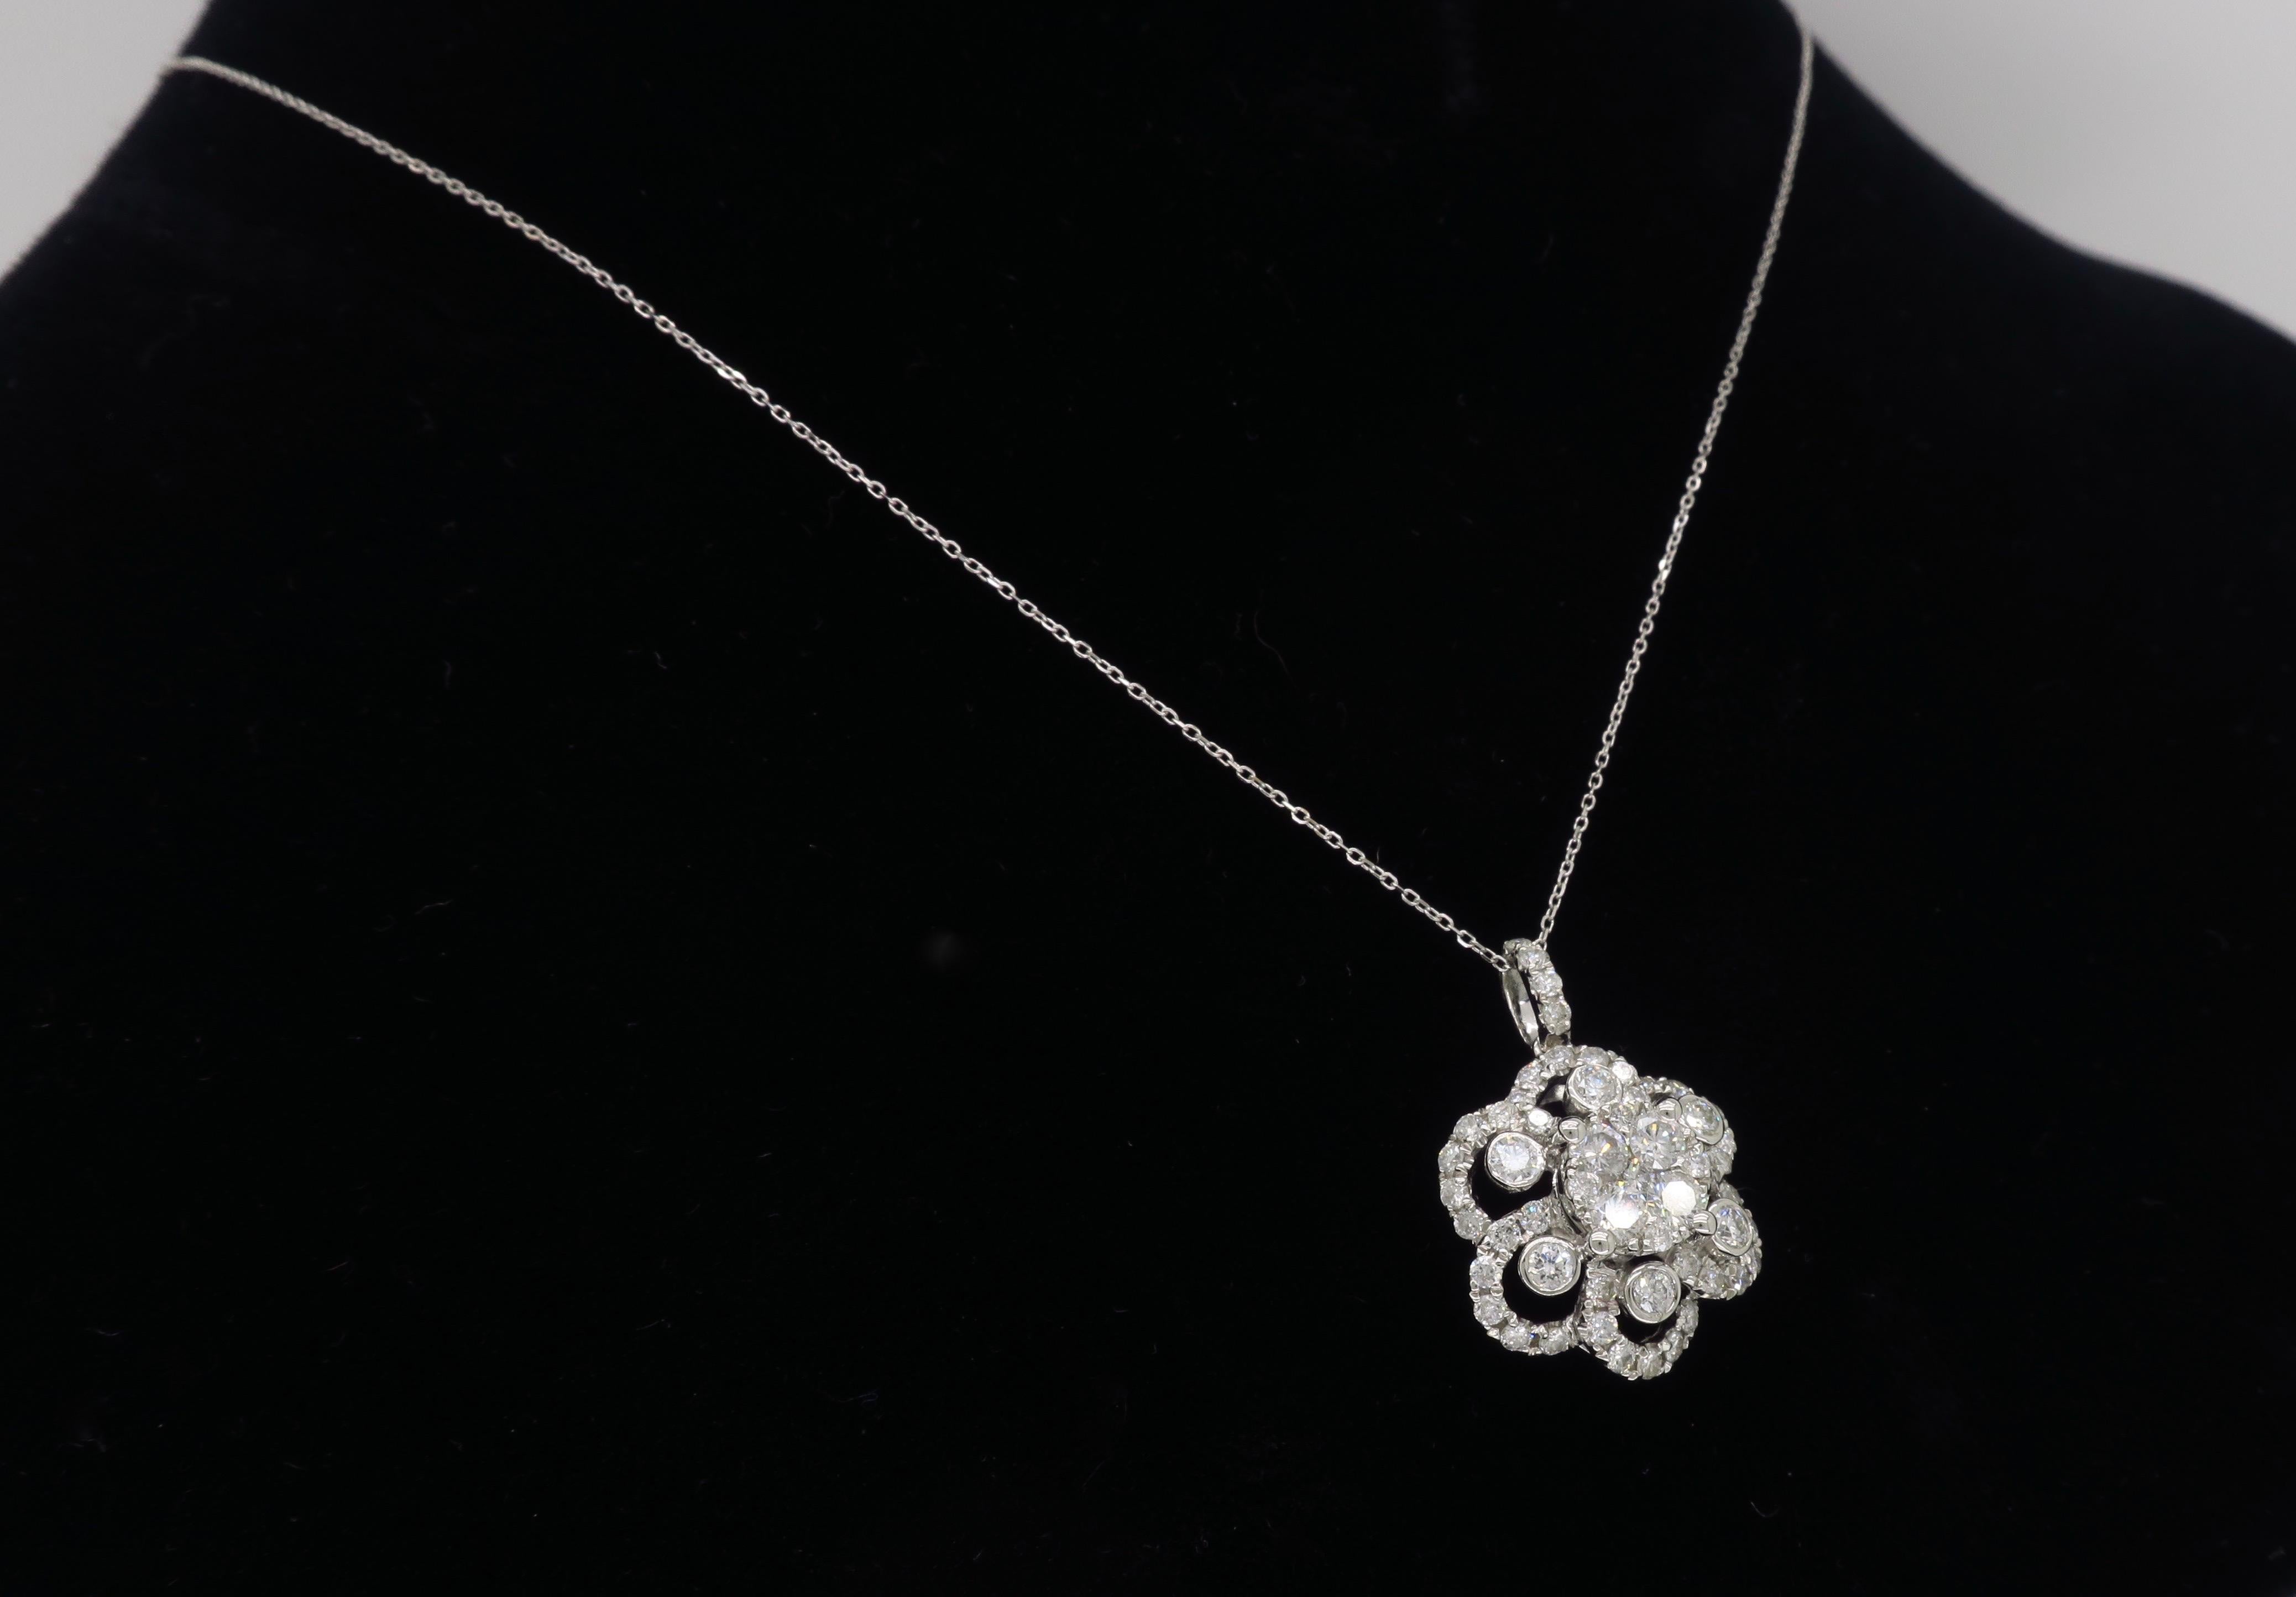 Floral Diamond Pendant Necklace in White Gold 3